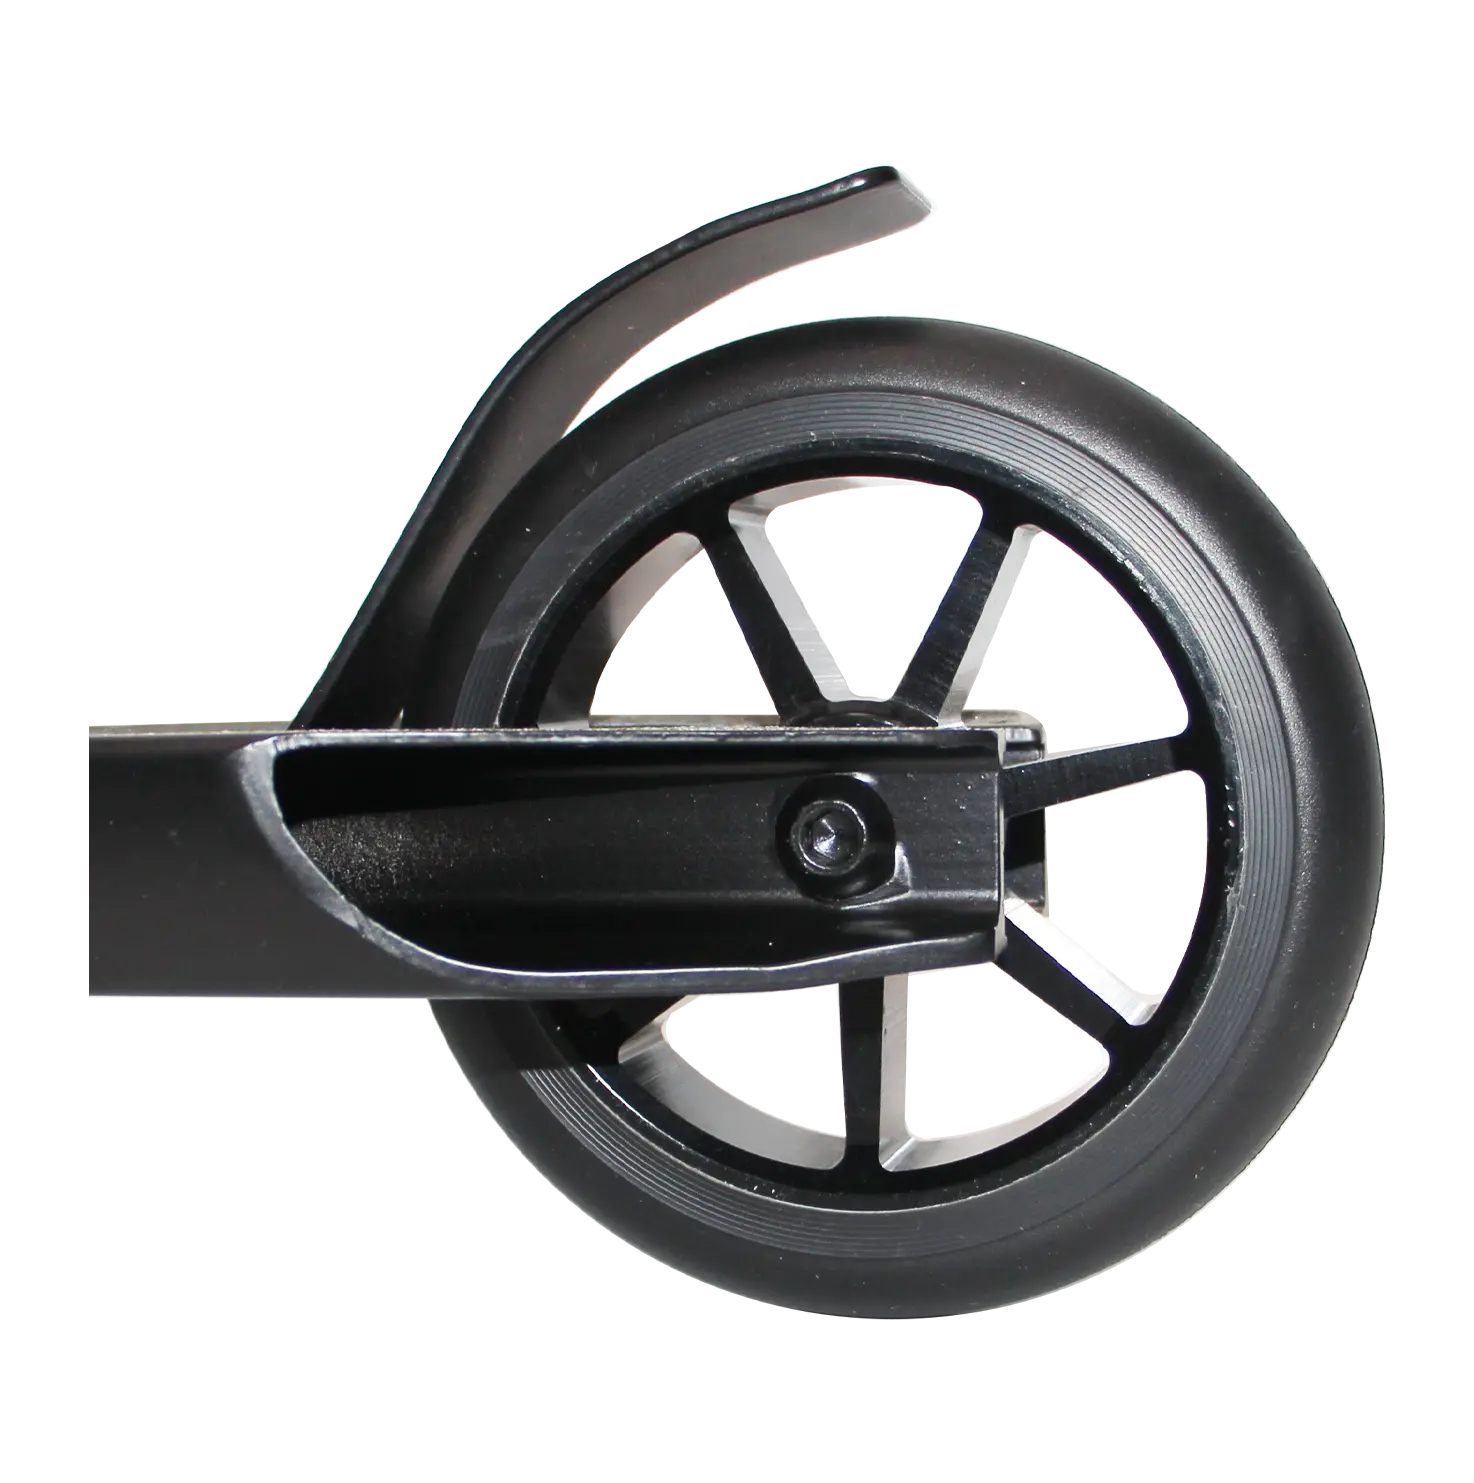 Stunt pro scooter rear wheel and brake 7